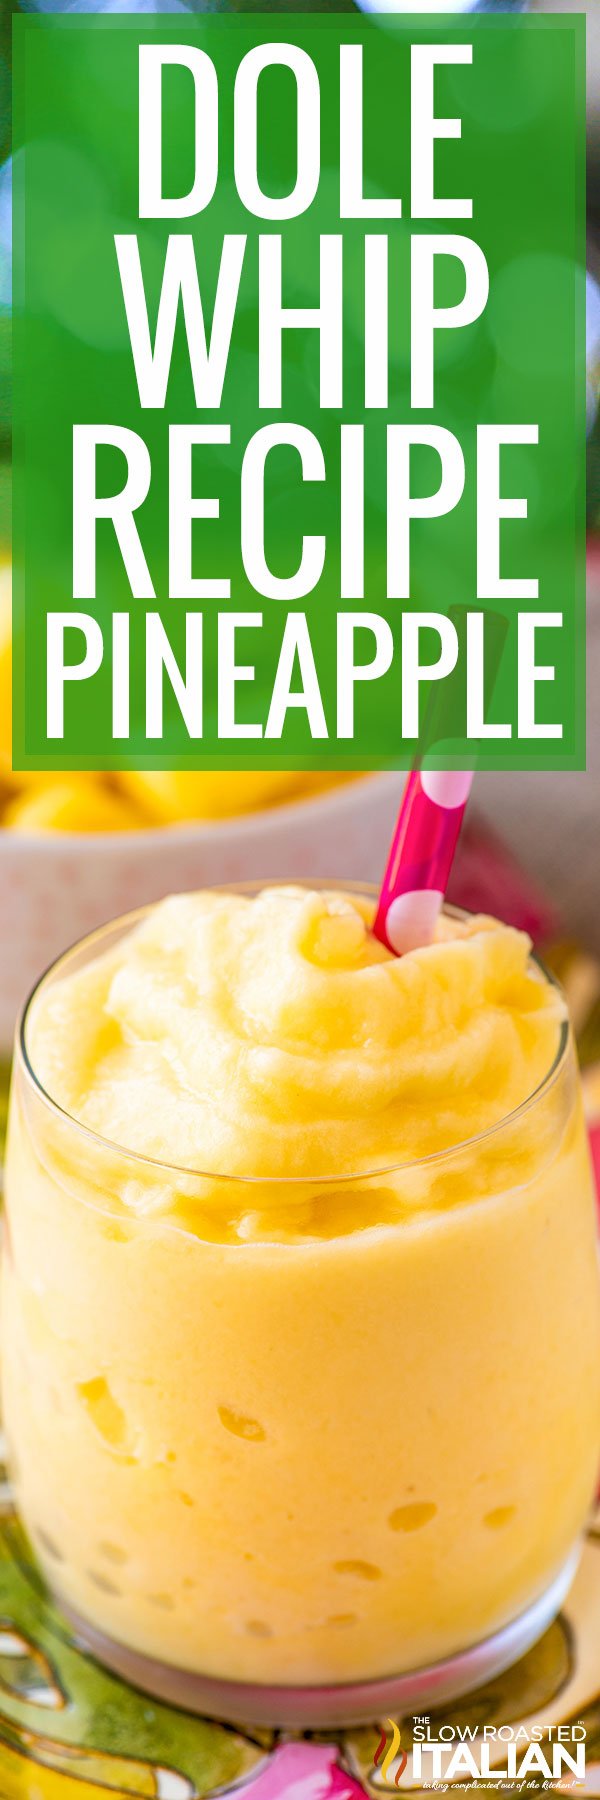 titled image (and shown): dole whip recipe pineapple